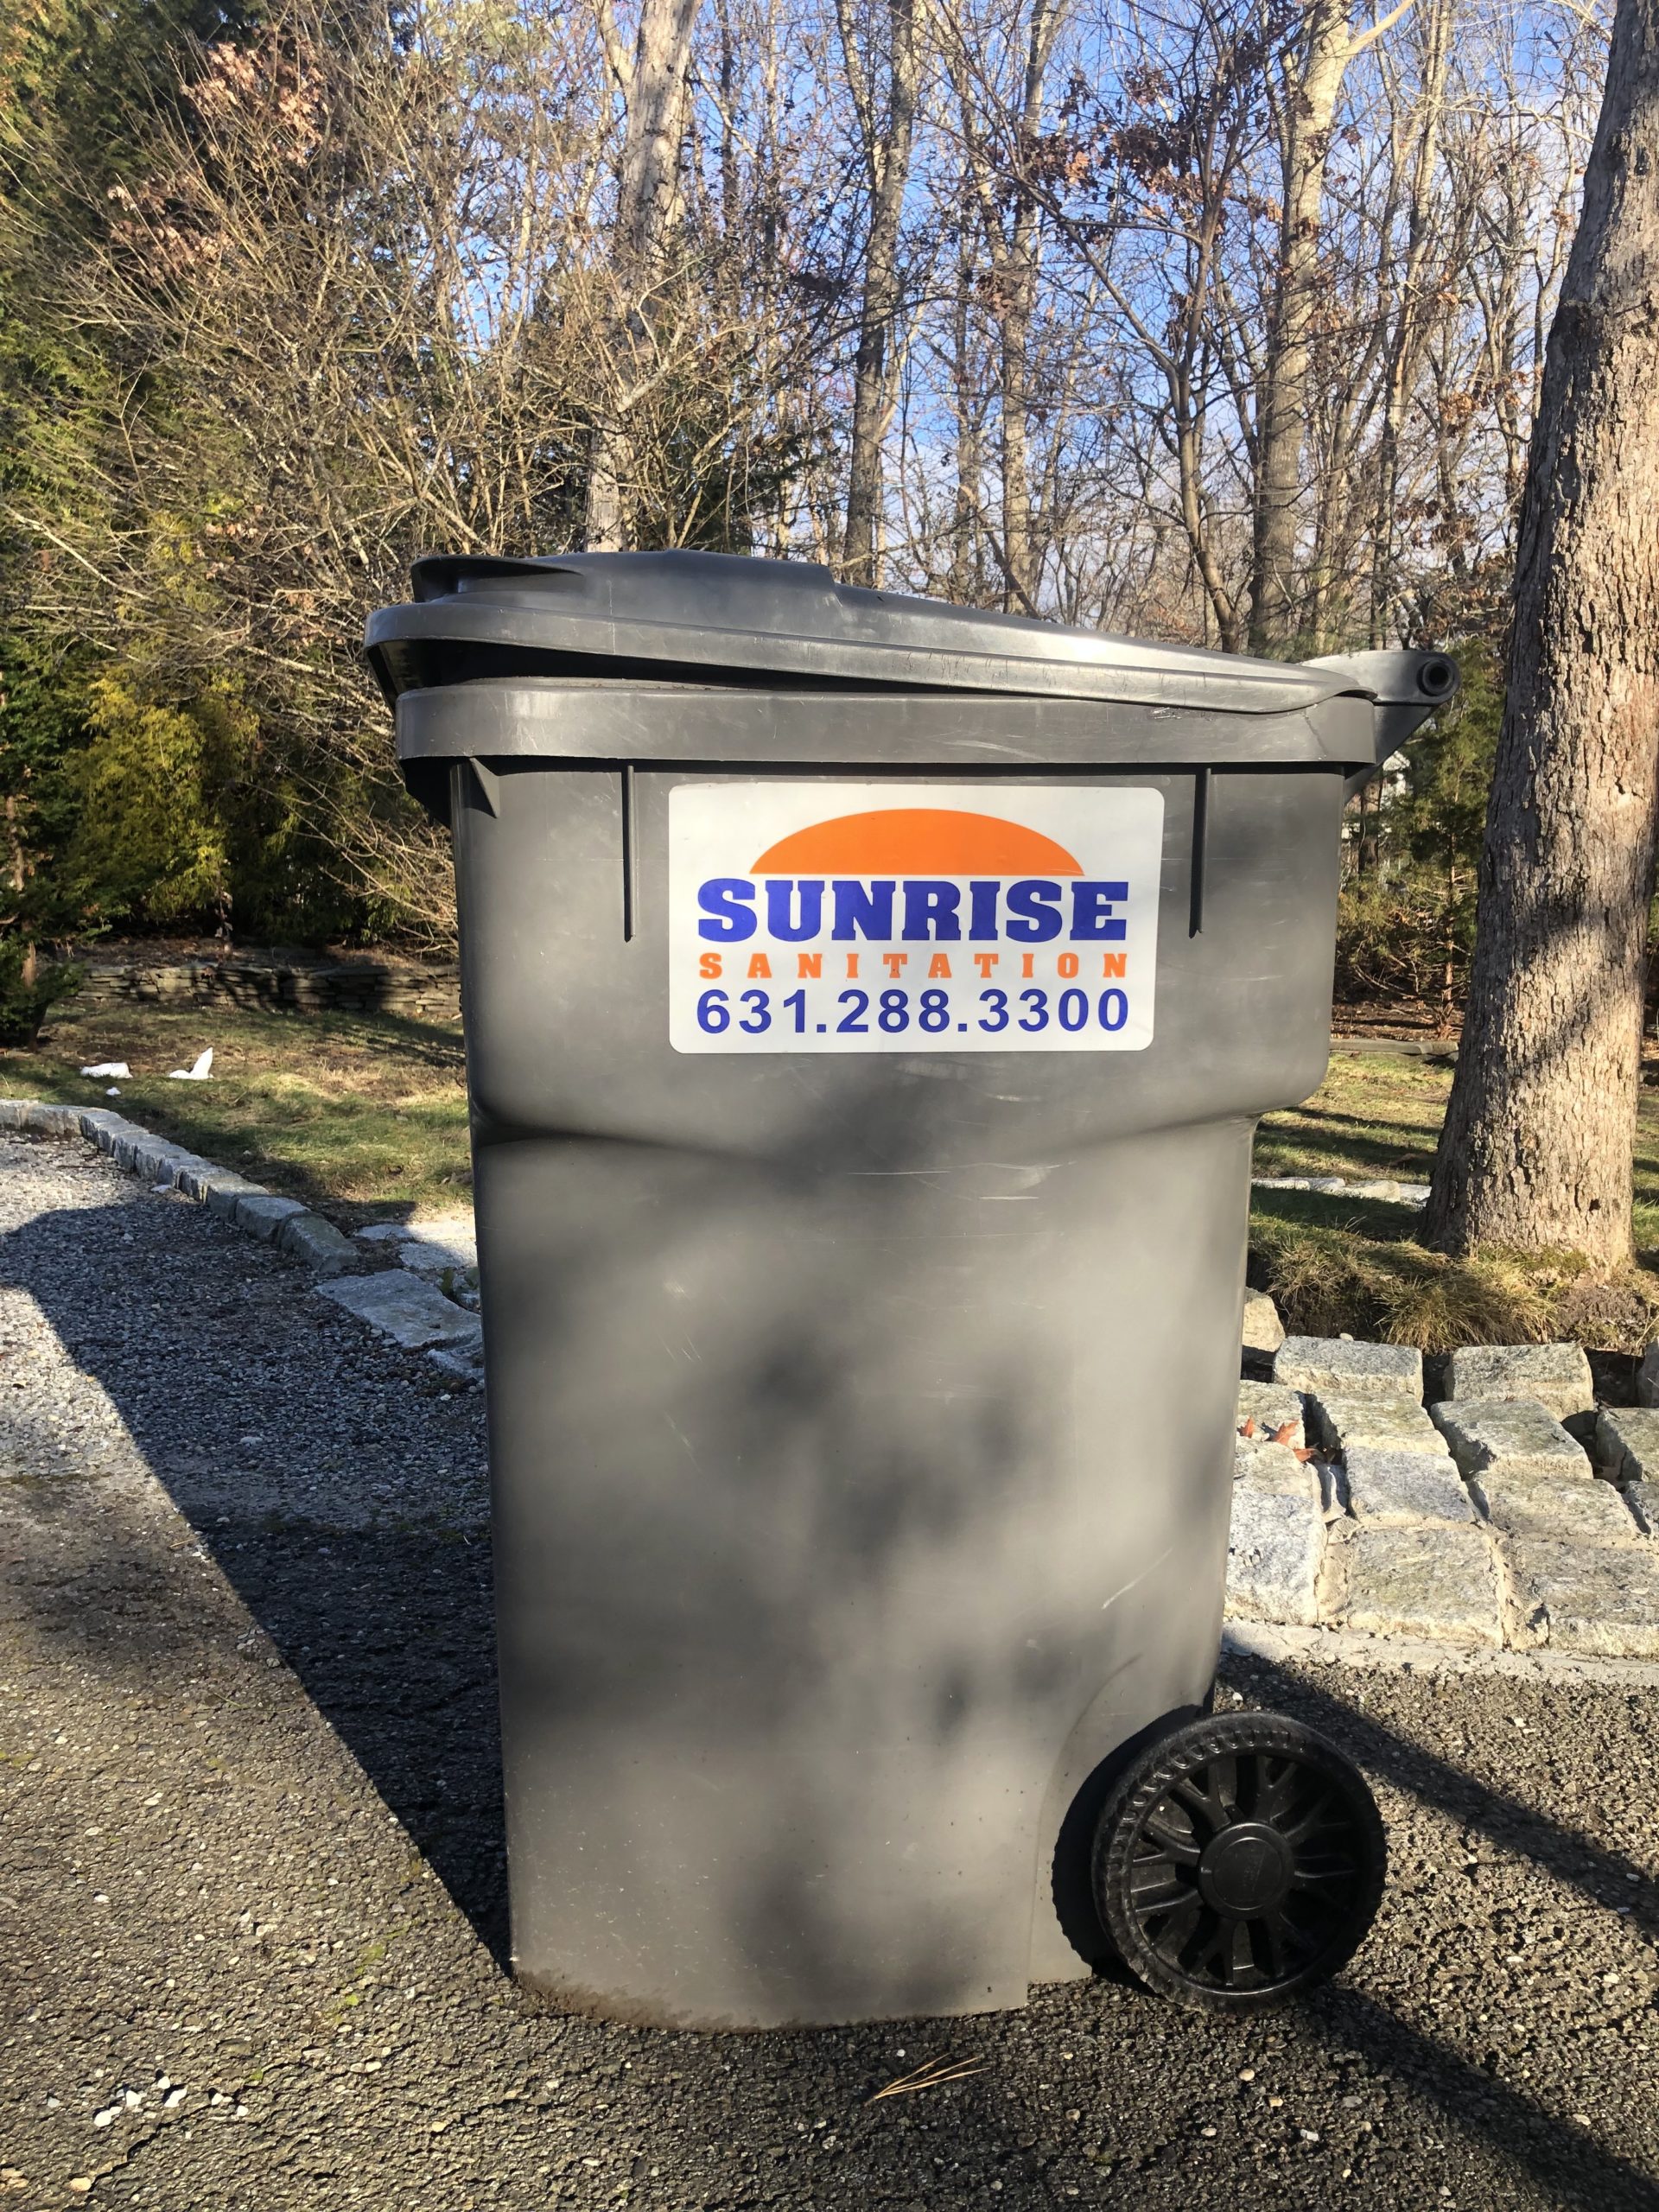 Westhampton-based Sunrise Sanitation is one of several private companies in the area that offers both curbside and back door garbage pickup on a weekly basis.